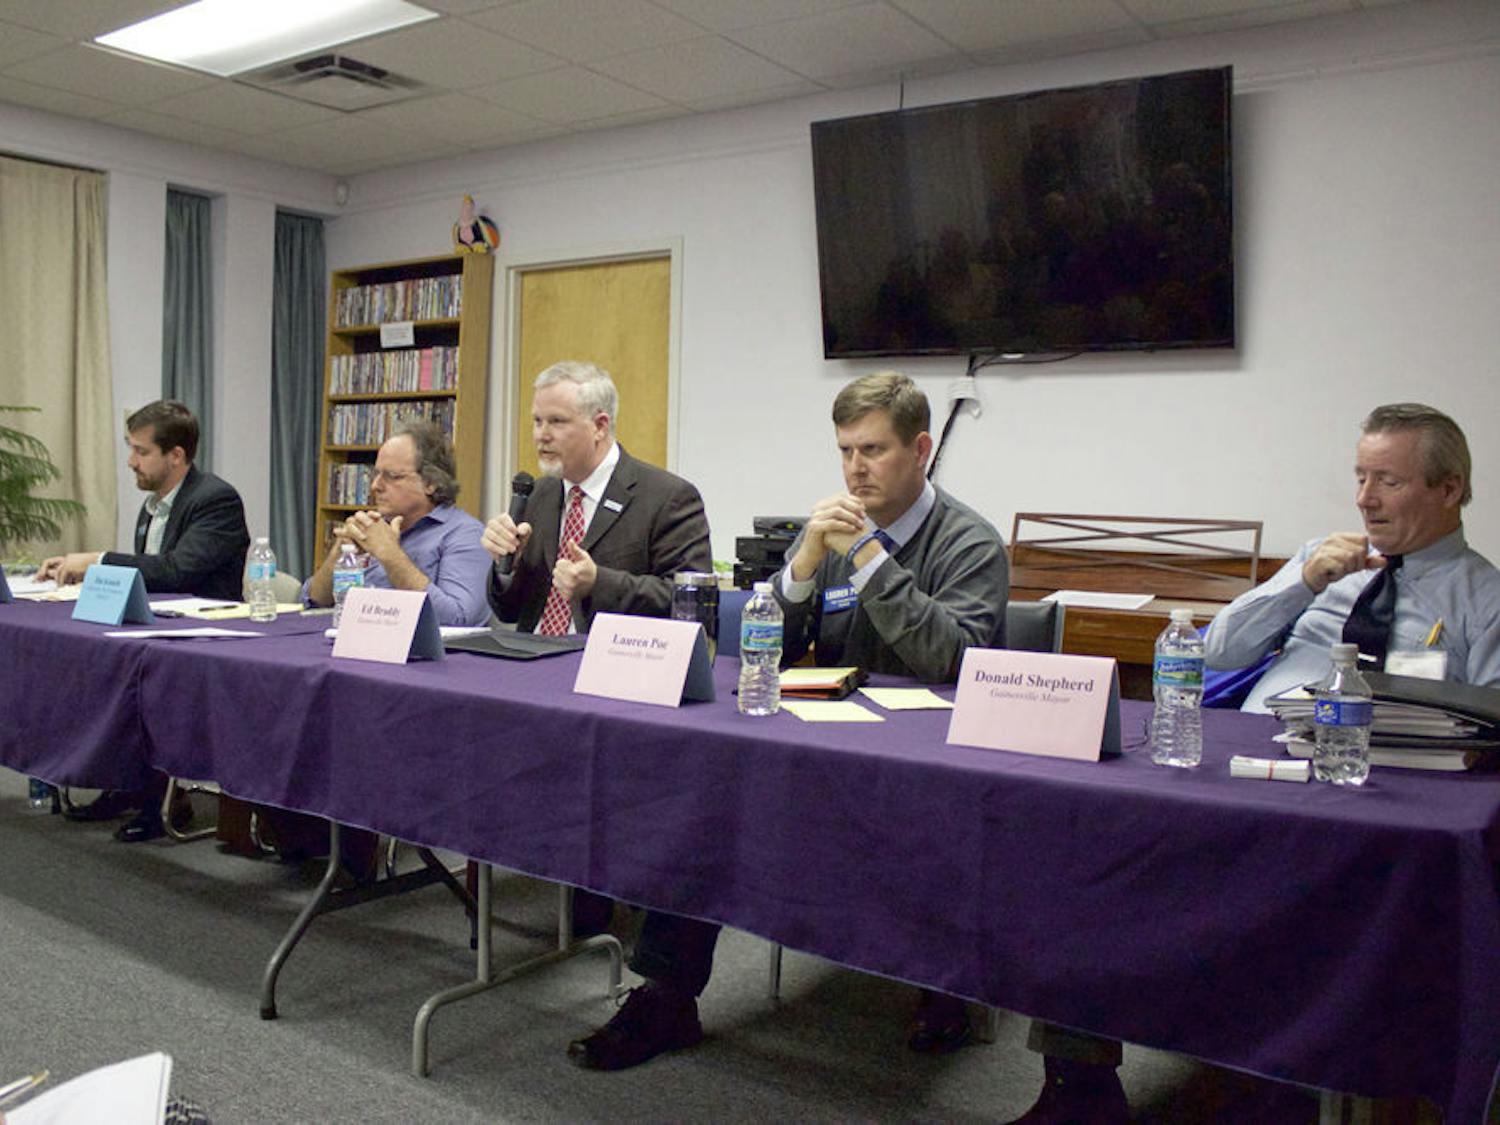 From left, Adrian Hayes-Santos, Jim Konish, Mayor Ed Braddy, Lauren Poe and Donald Shepherd Sr. participate in a city elections forum at the Pride Community Center of North Central Florida on Monday night.